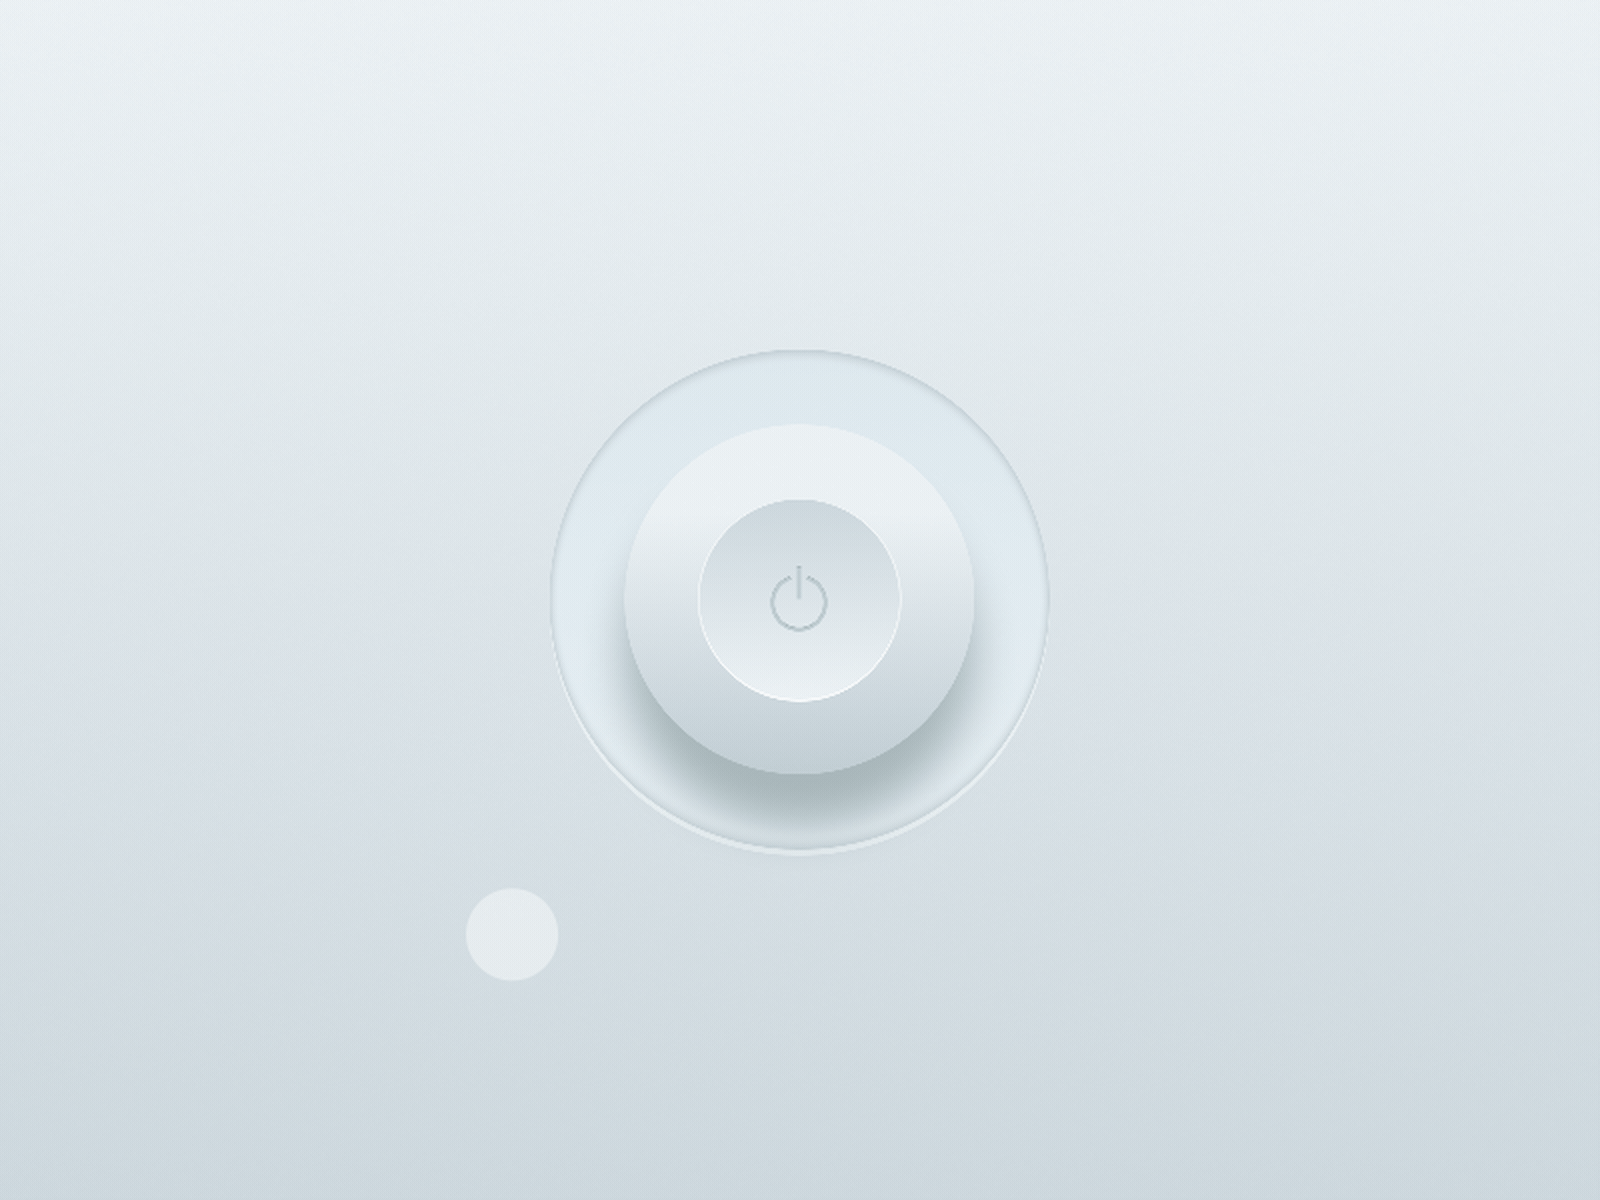 Daily UI 015 - On / Off Switch